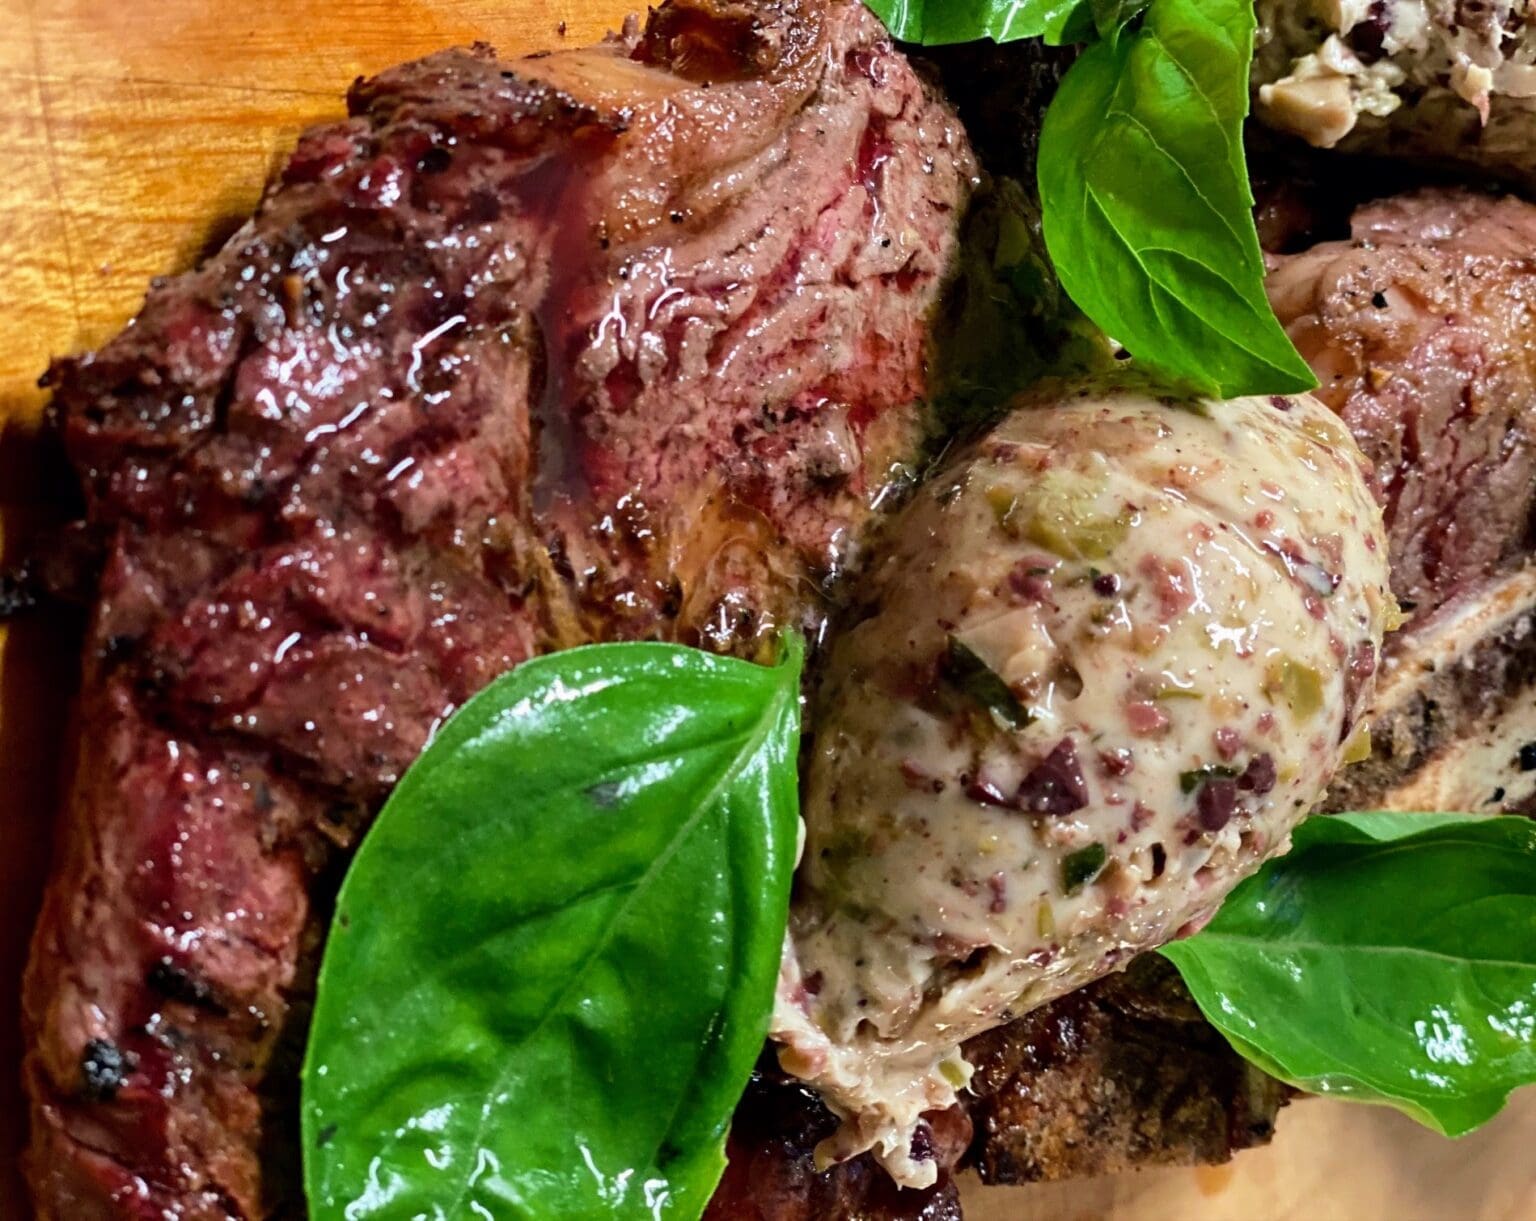 Grass fed ribeye steak served with basil and tapenade butter.